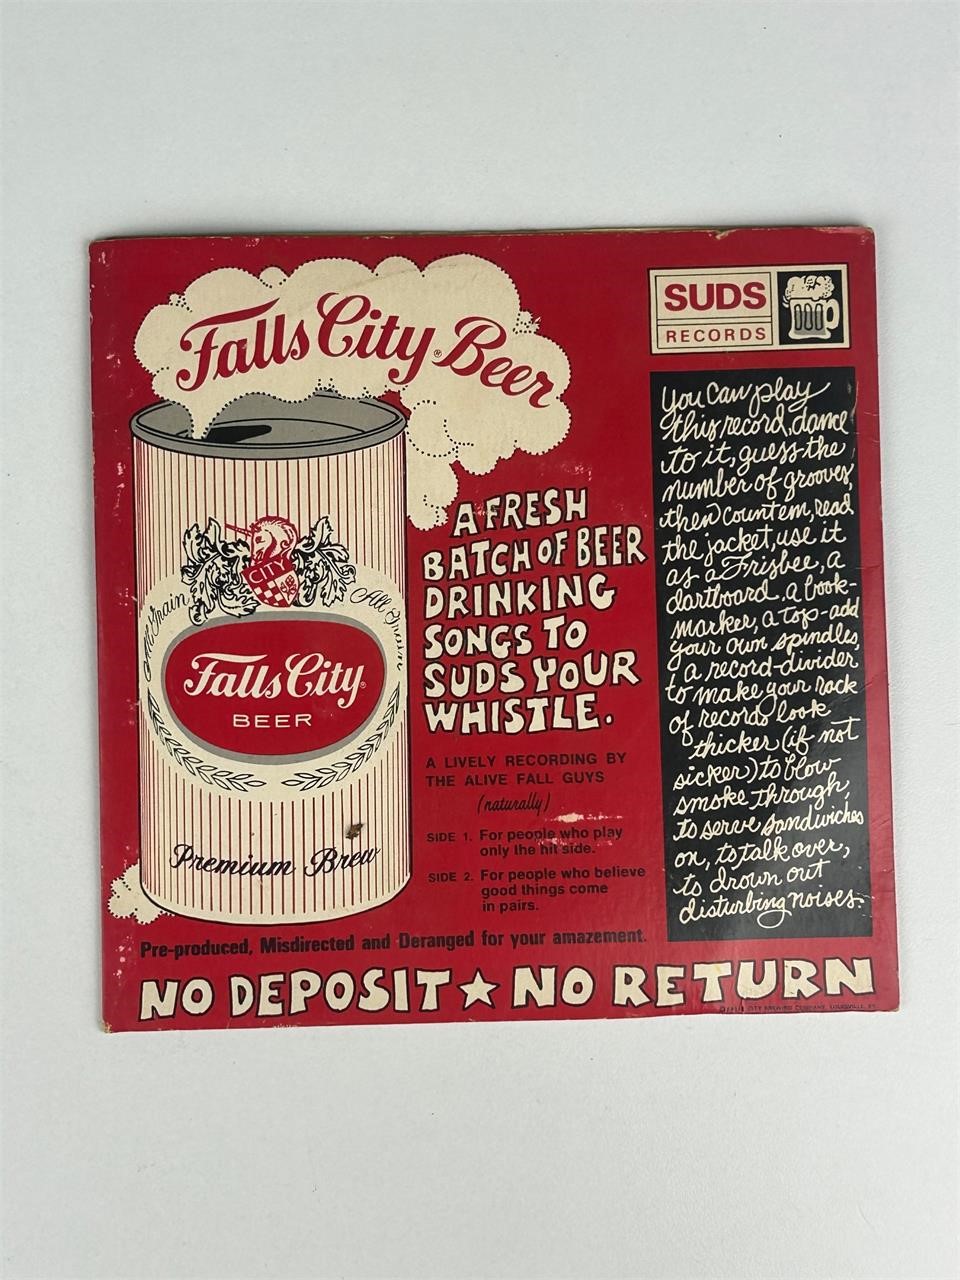 Vintage Fall City Beer record